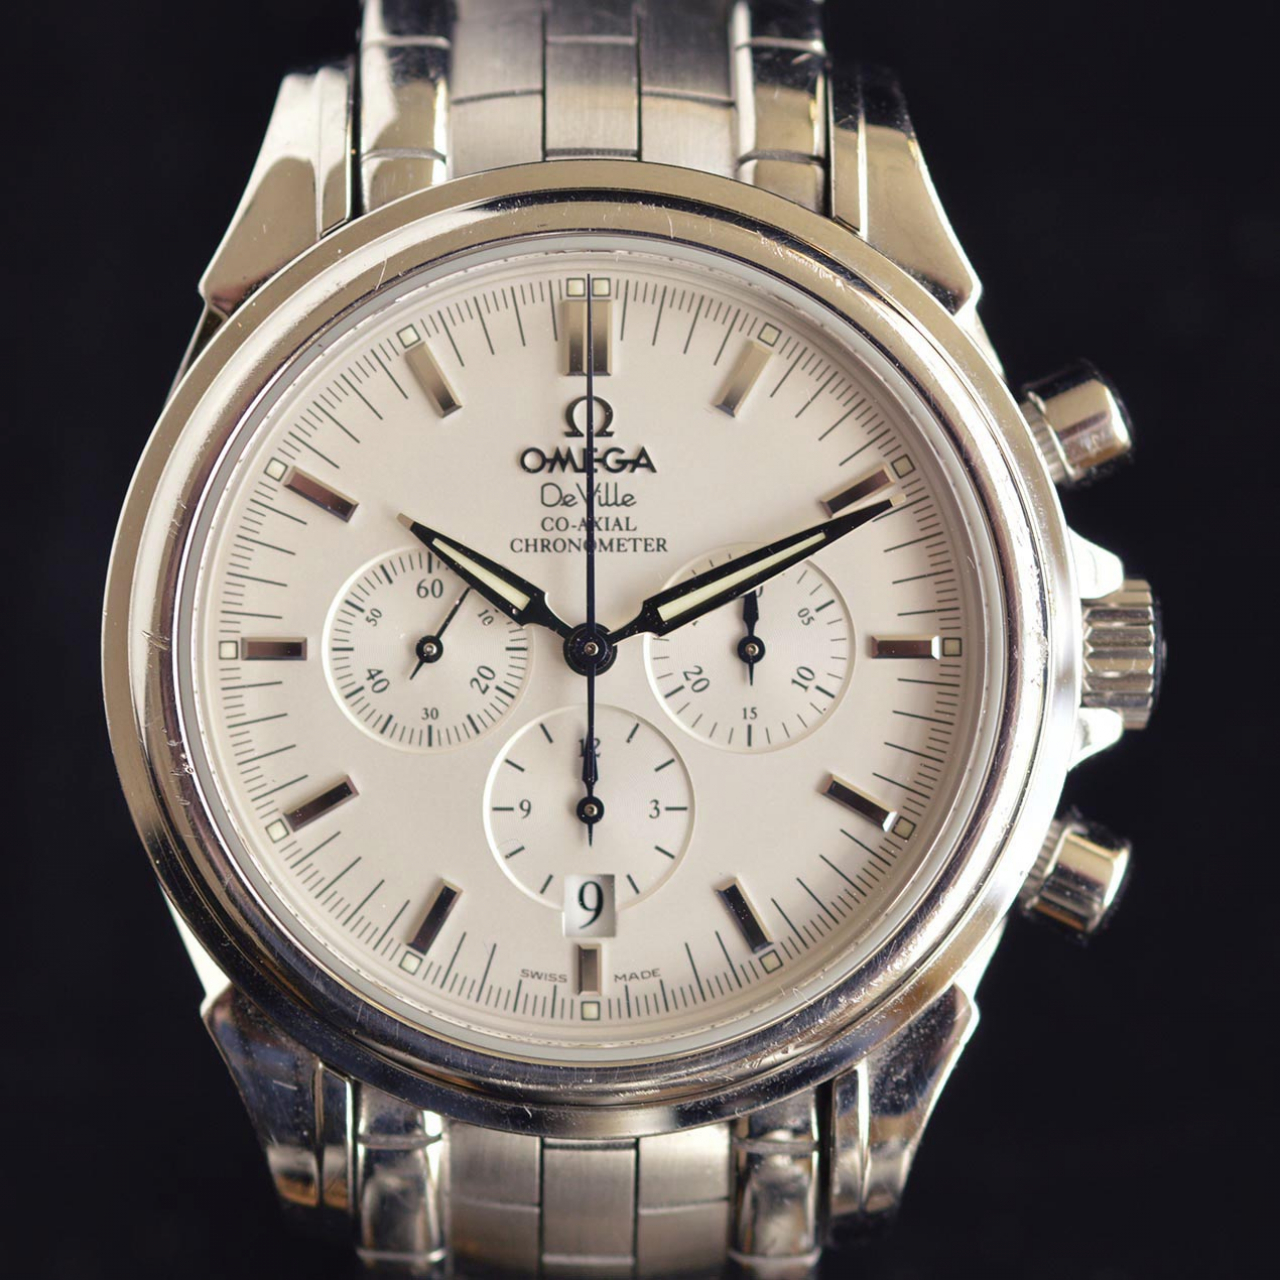 omega-de-ville-co-axial-chronograph-chronometer-stainless-steel-ref-45413100-cal-3313